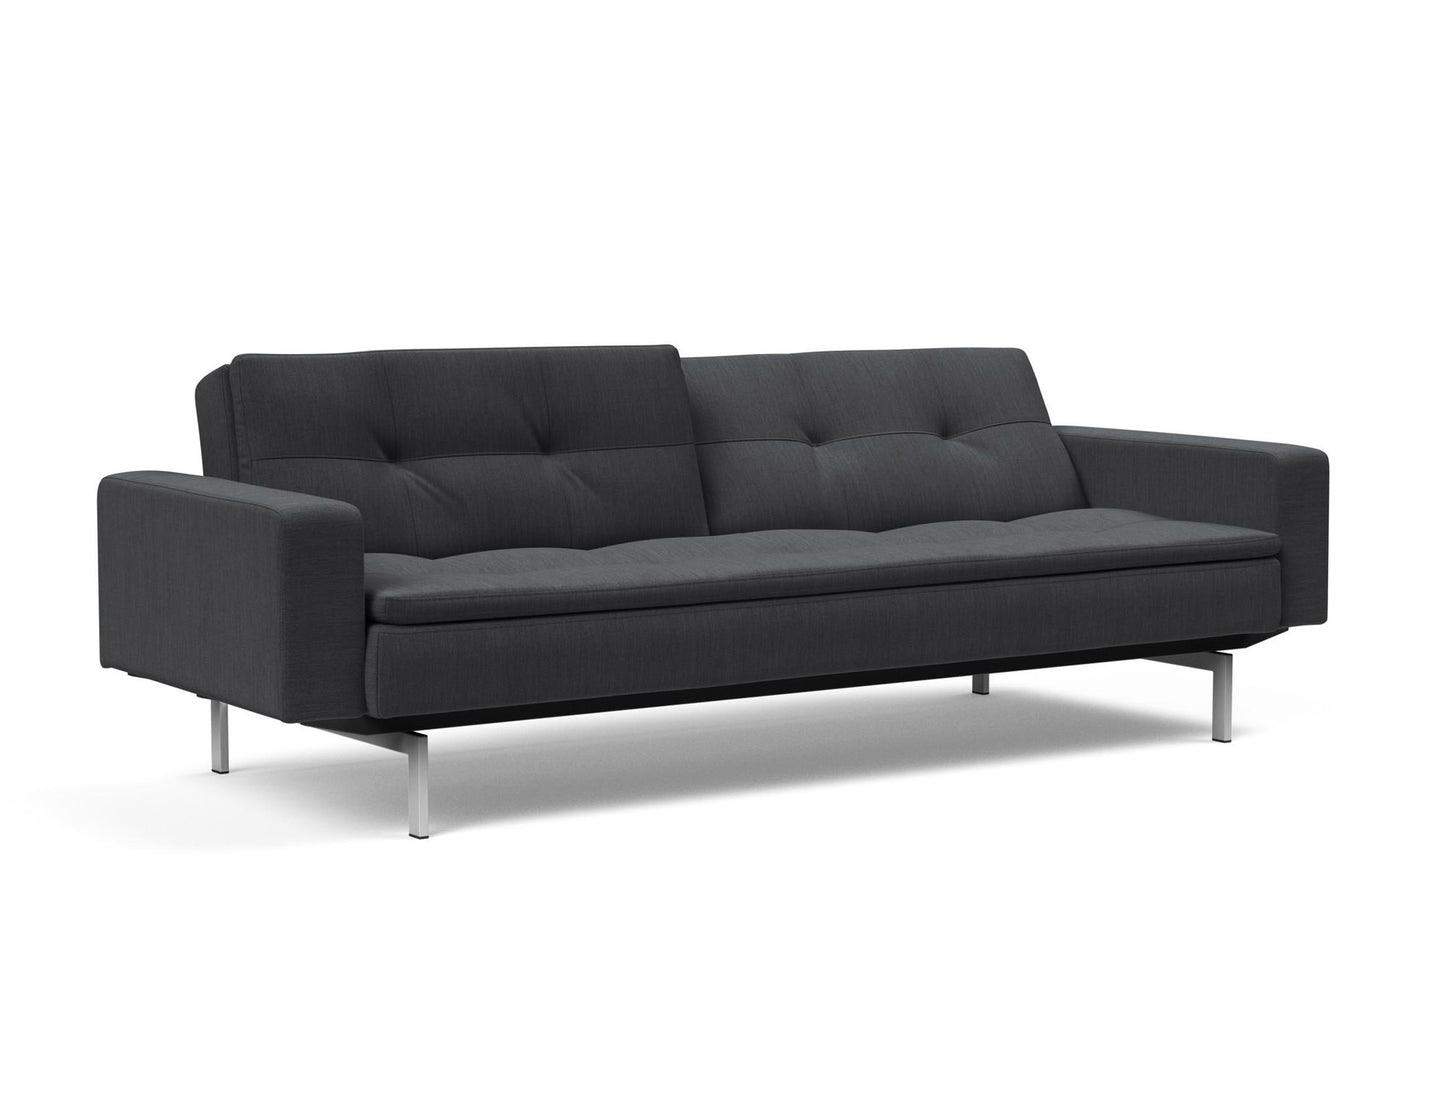 Innovation Living Dublexo Sofa Bed Stainless Steel with Arms